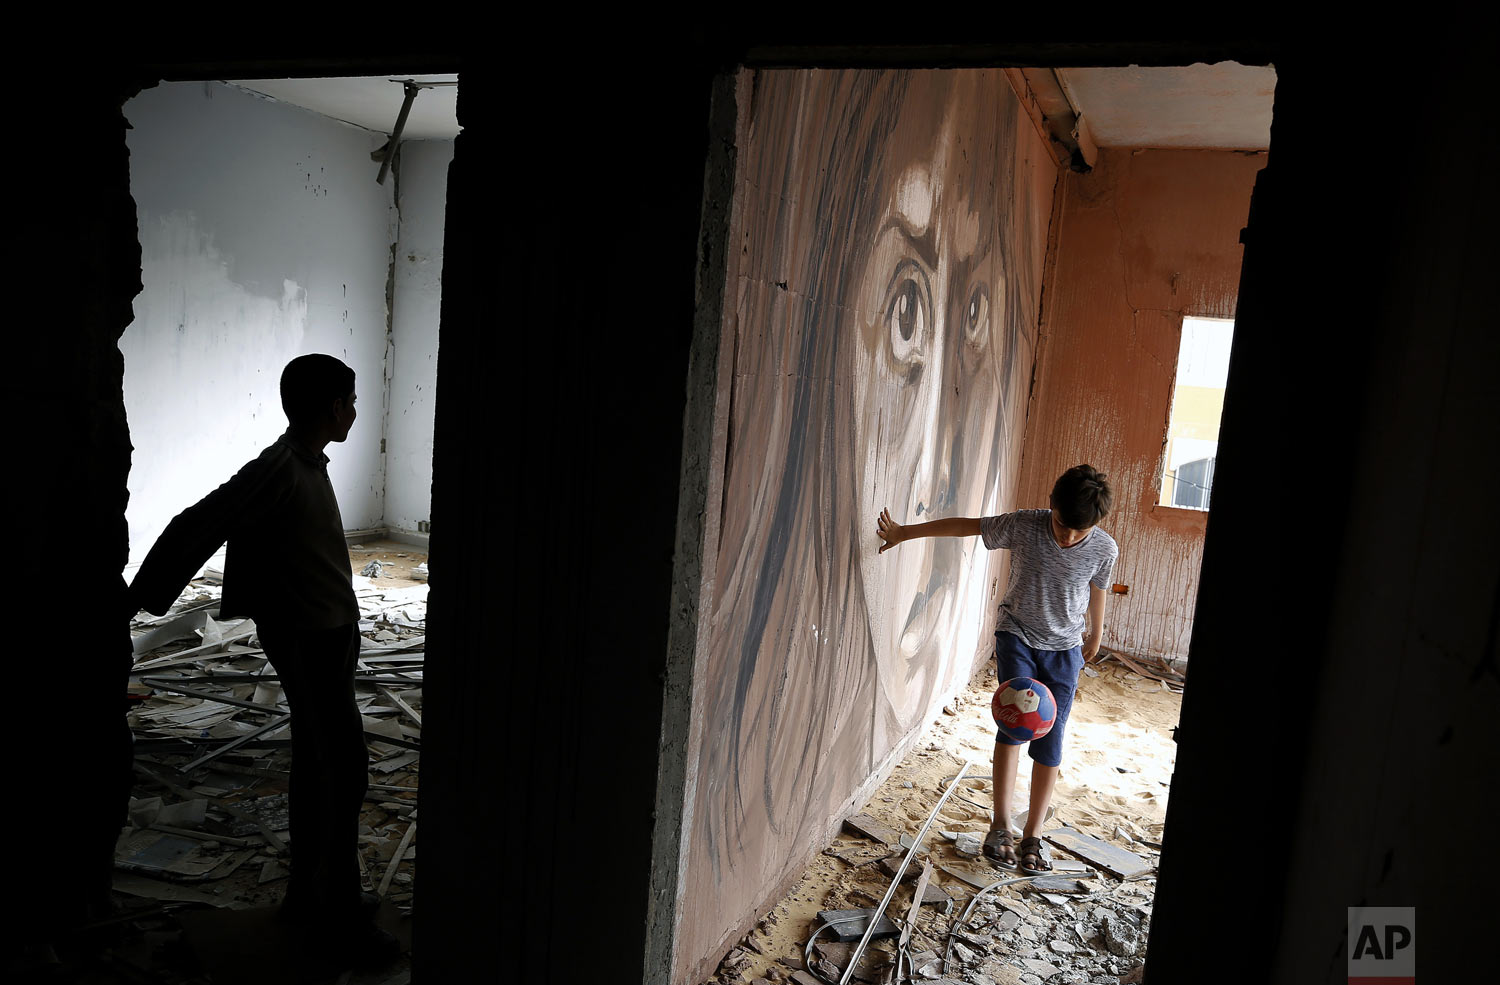  A boy plays football next to a mural painted by Palestinian artist Ali Al-Jabali in the remains of a building that was damaged during the 2014 war between Israel and Hamas, in Gaza City, Tuesday, April 30, 2019. (AP Photo/Hatem Moussa) 